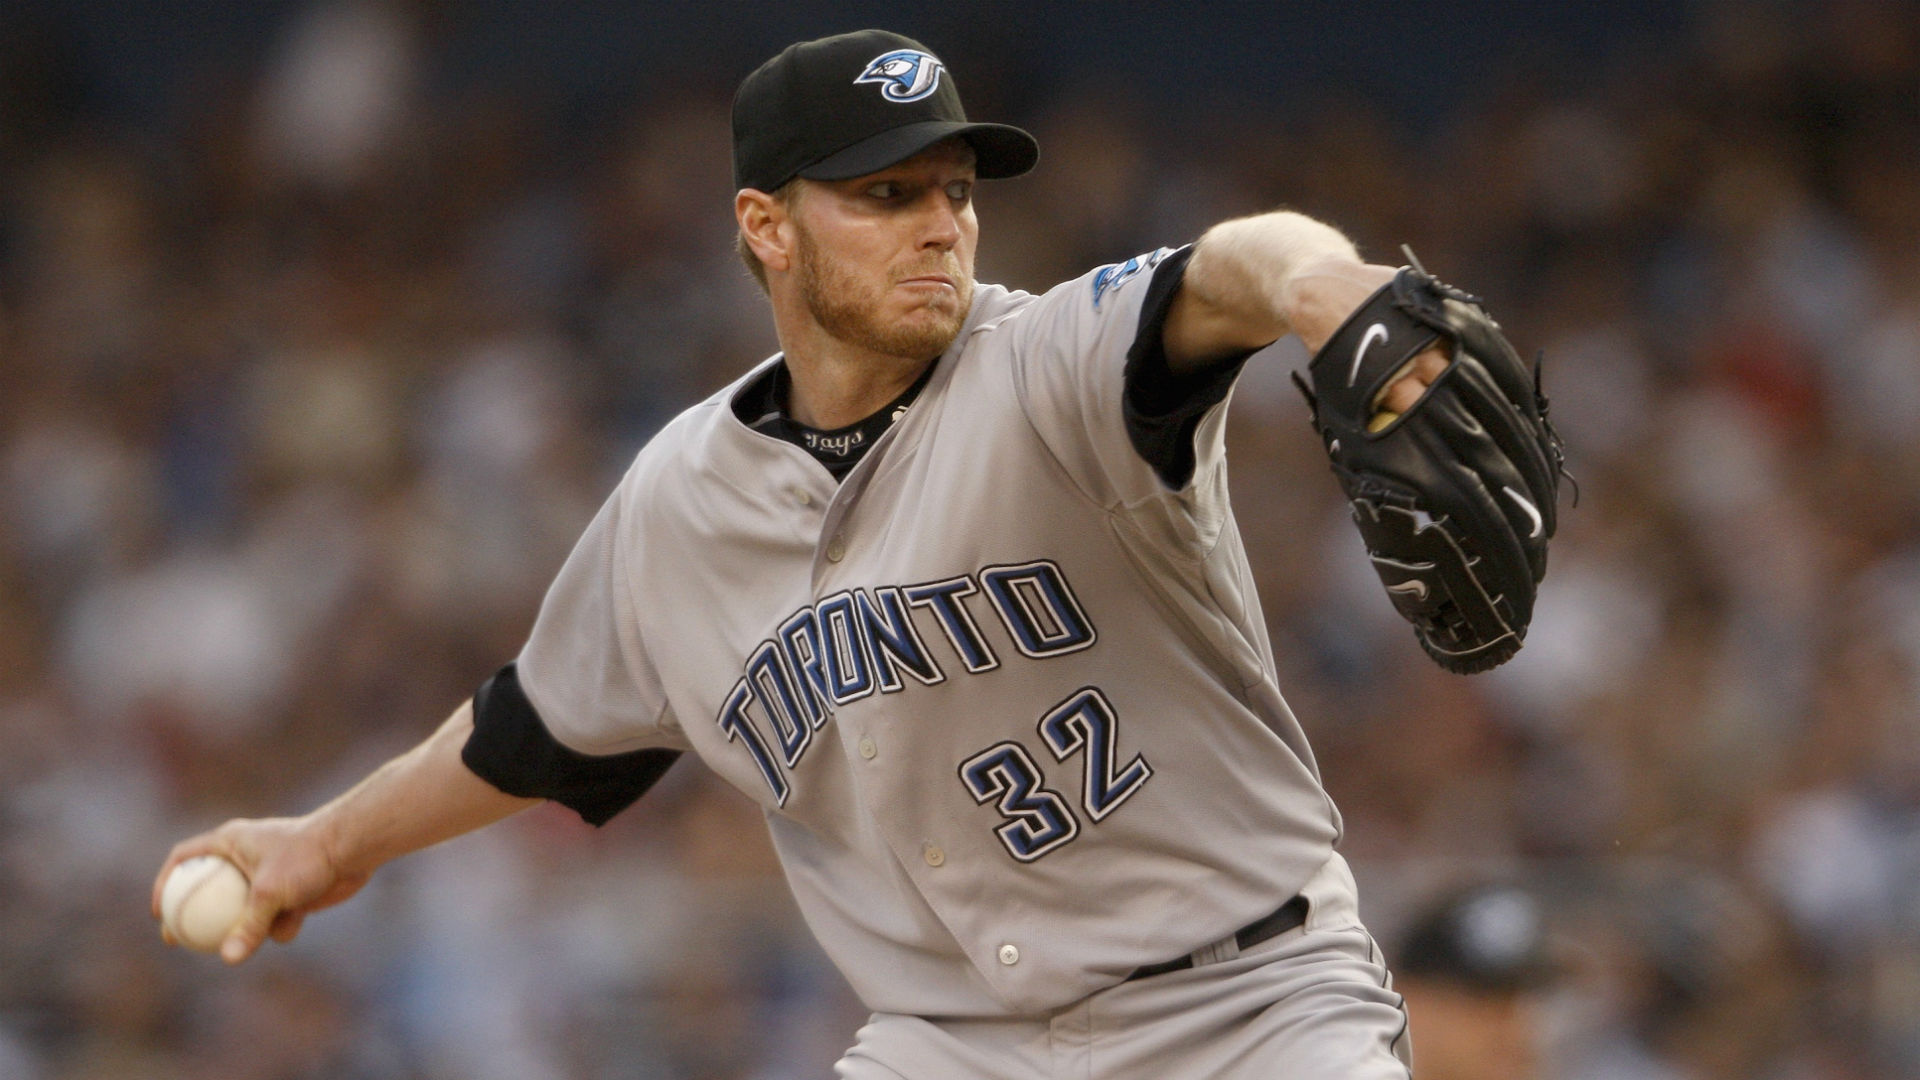 Legendary Blue Jays pitcher Roy Halladay elected to Baseball Hall of